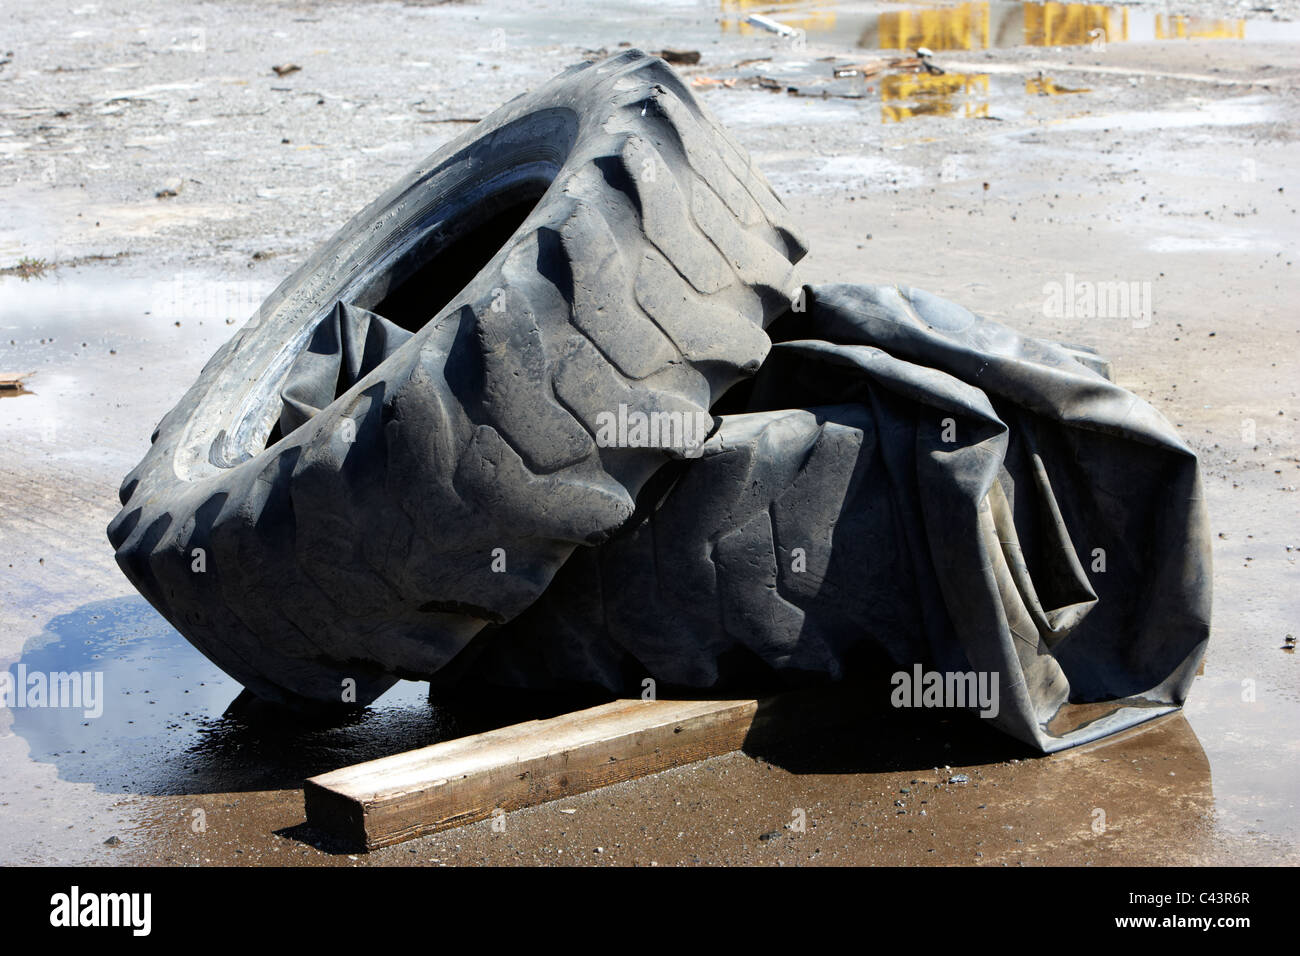 discarded punctured large vehicle tyres Stock Photo